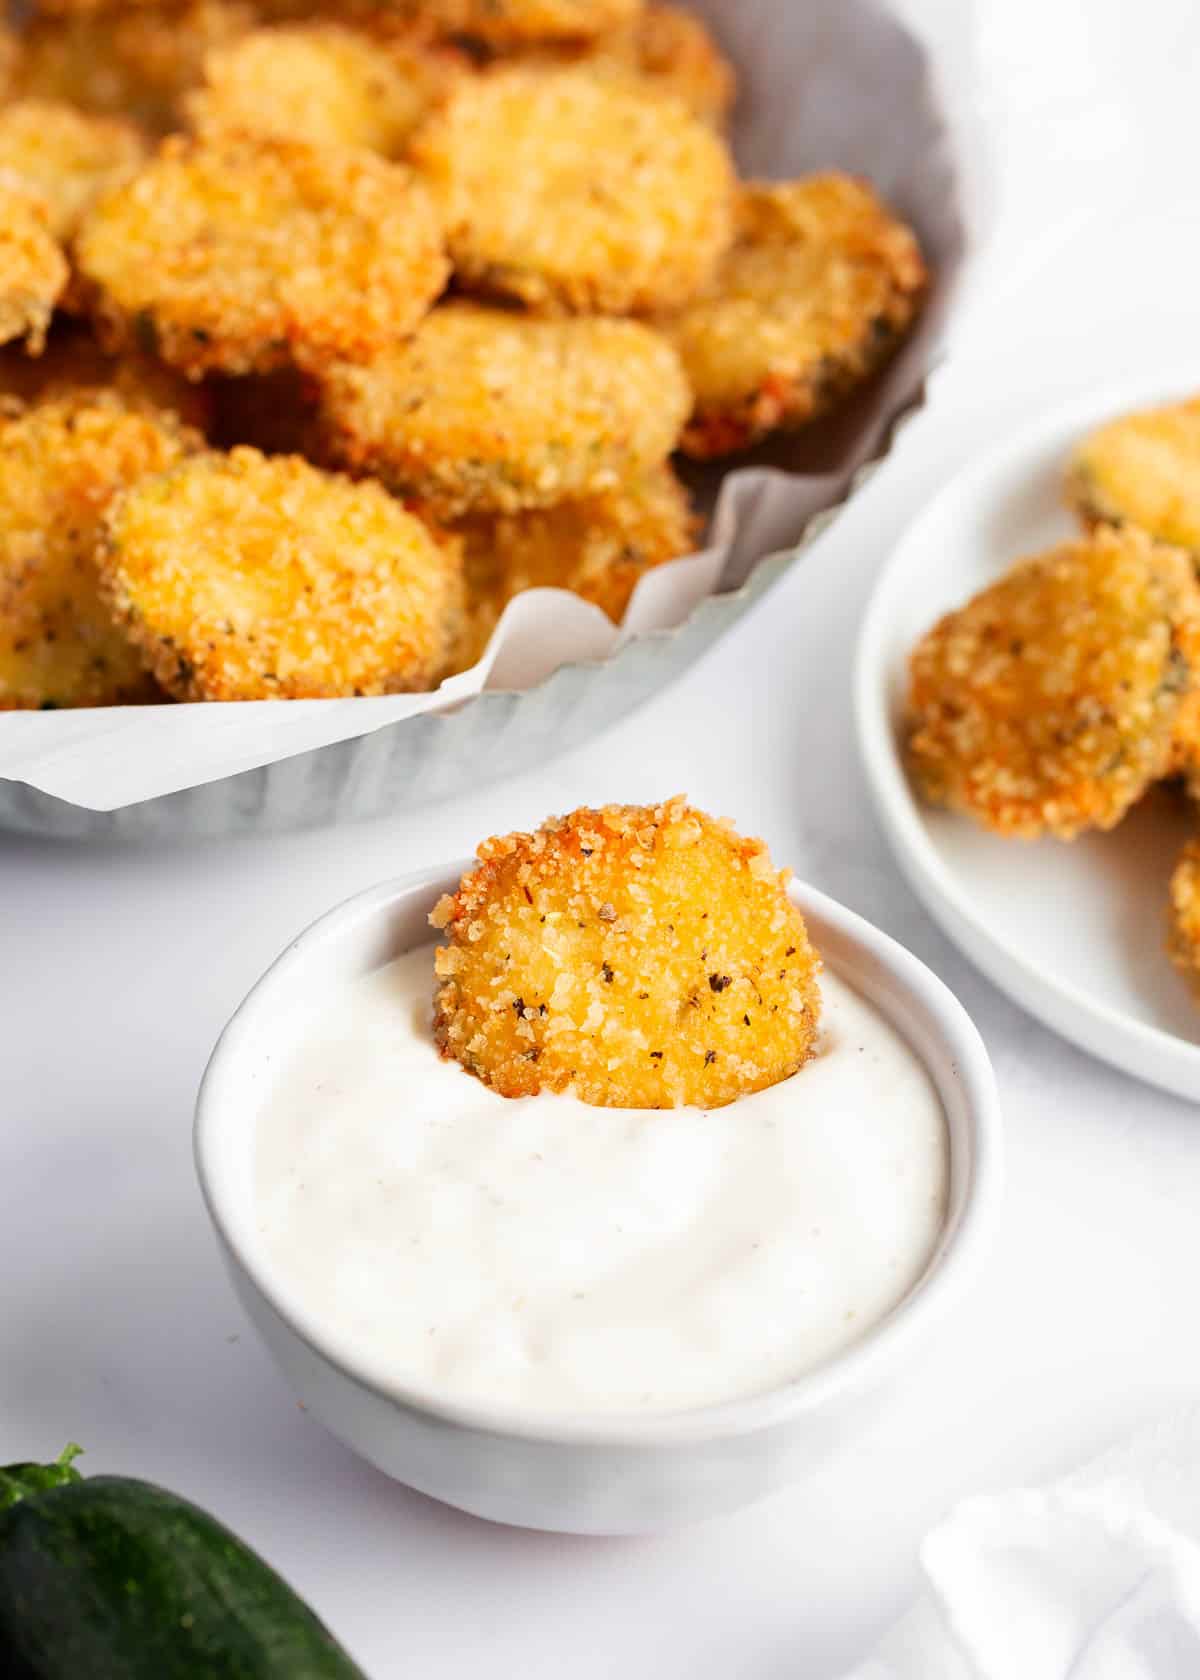 Dipping fried zucchini in ranch.